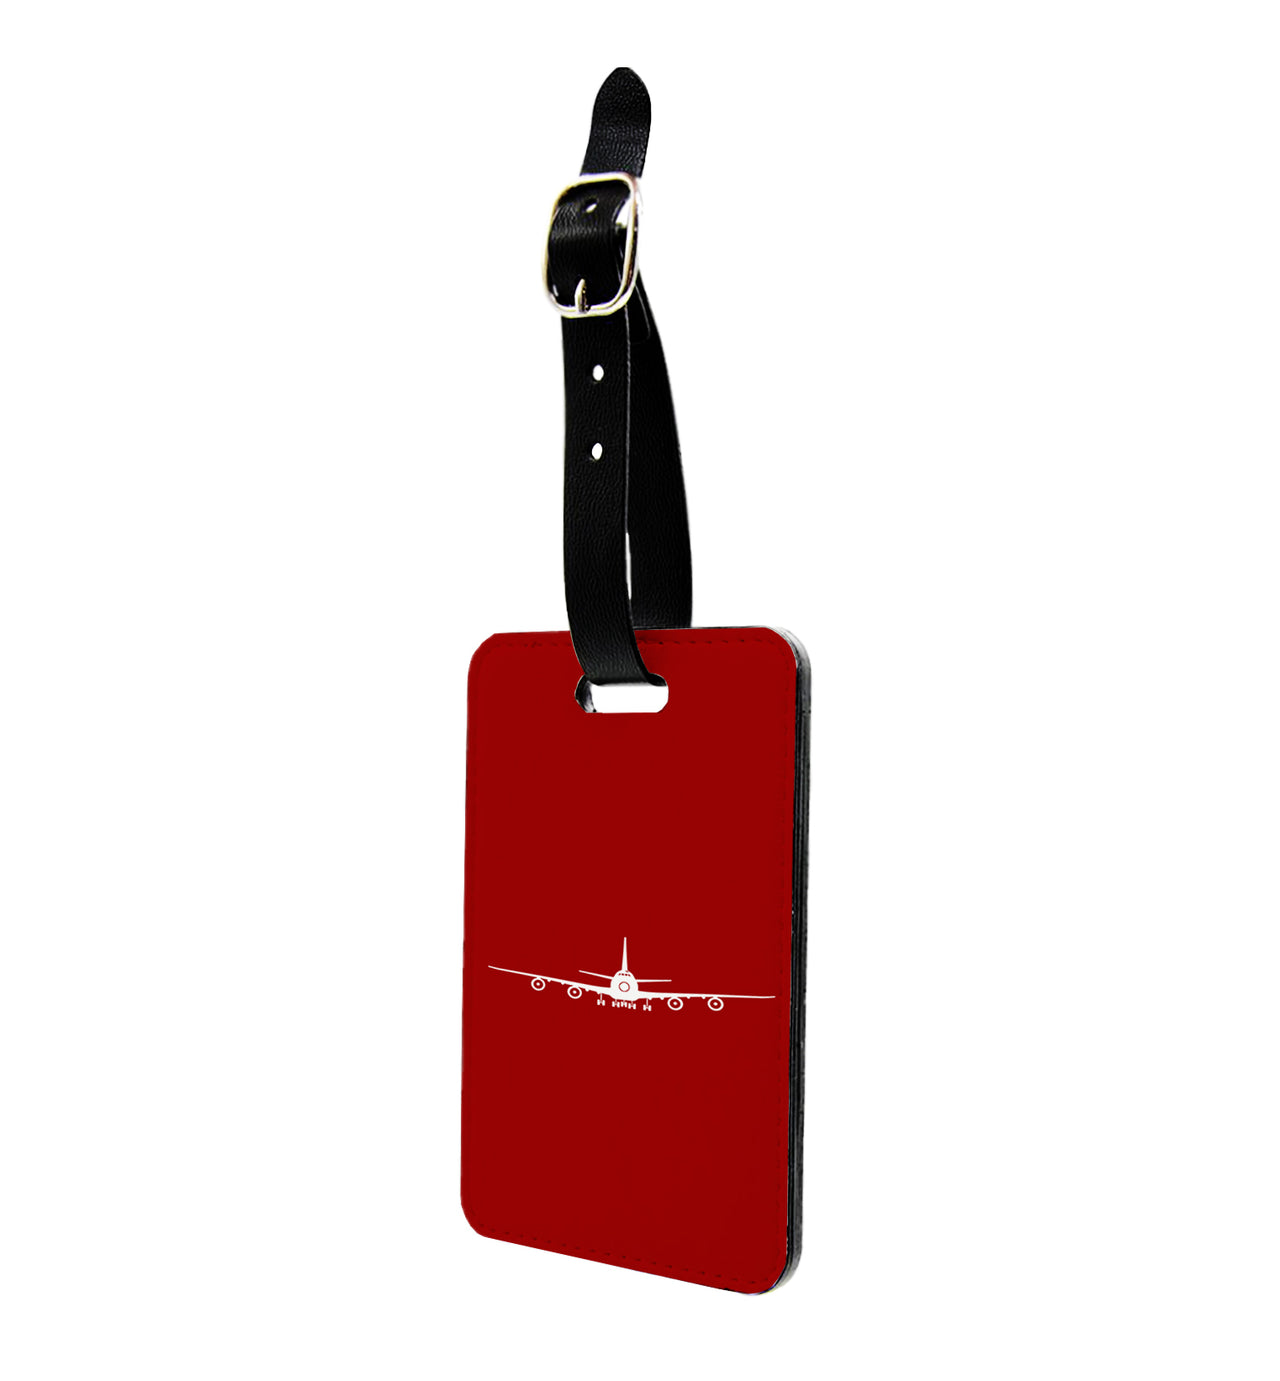 Boeing 747 Silhouette Designed Luggage Tag